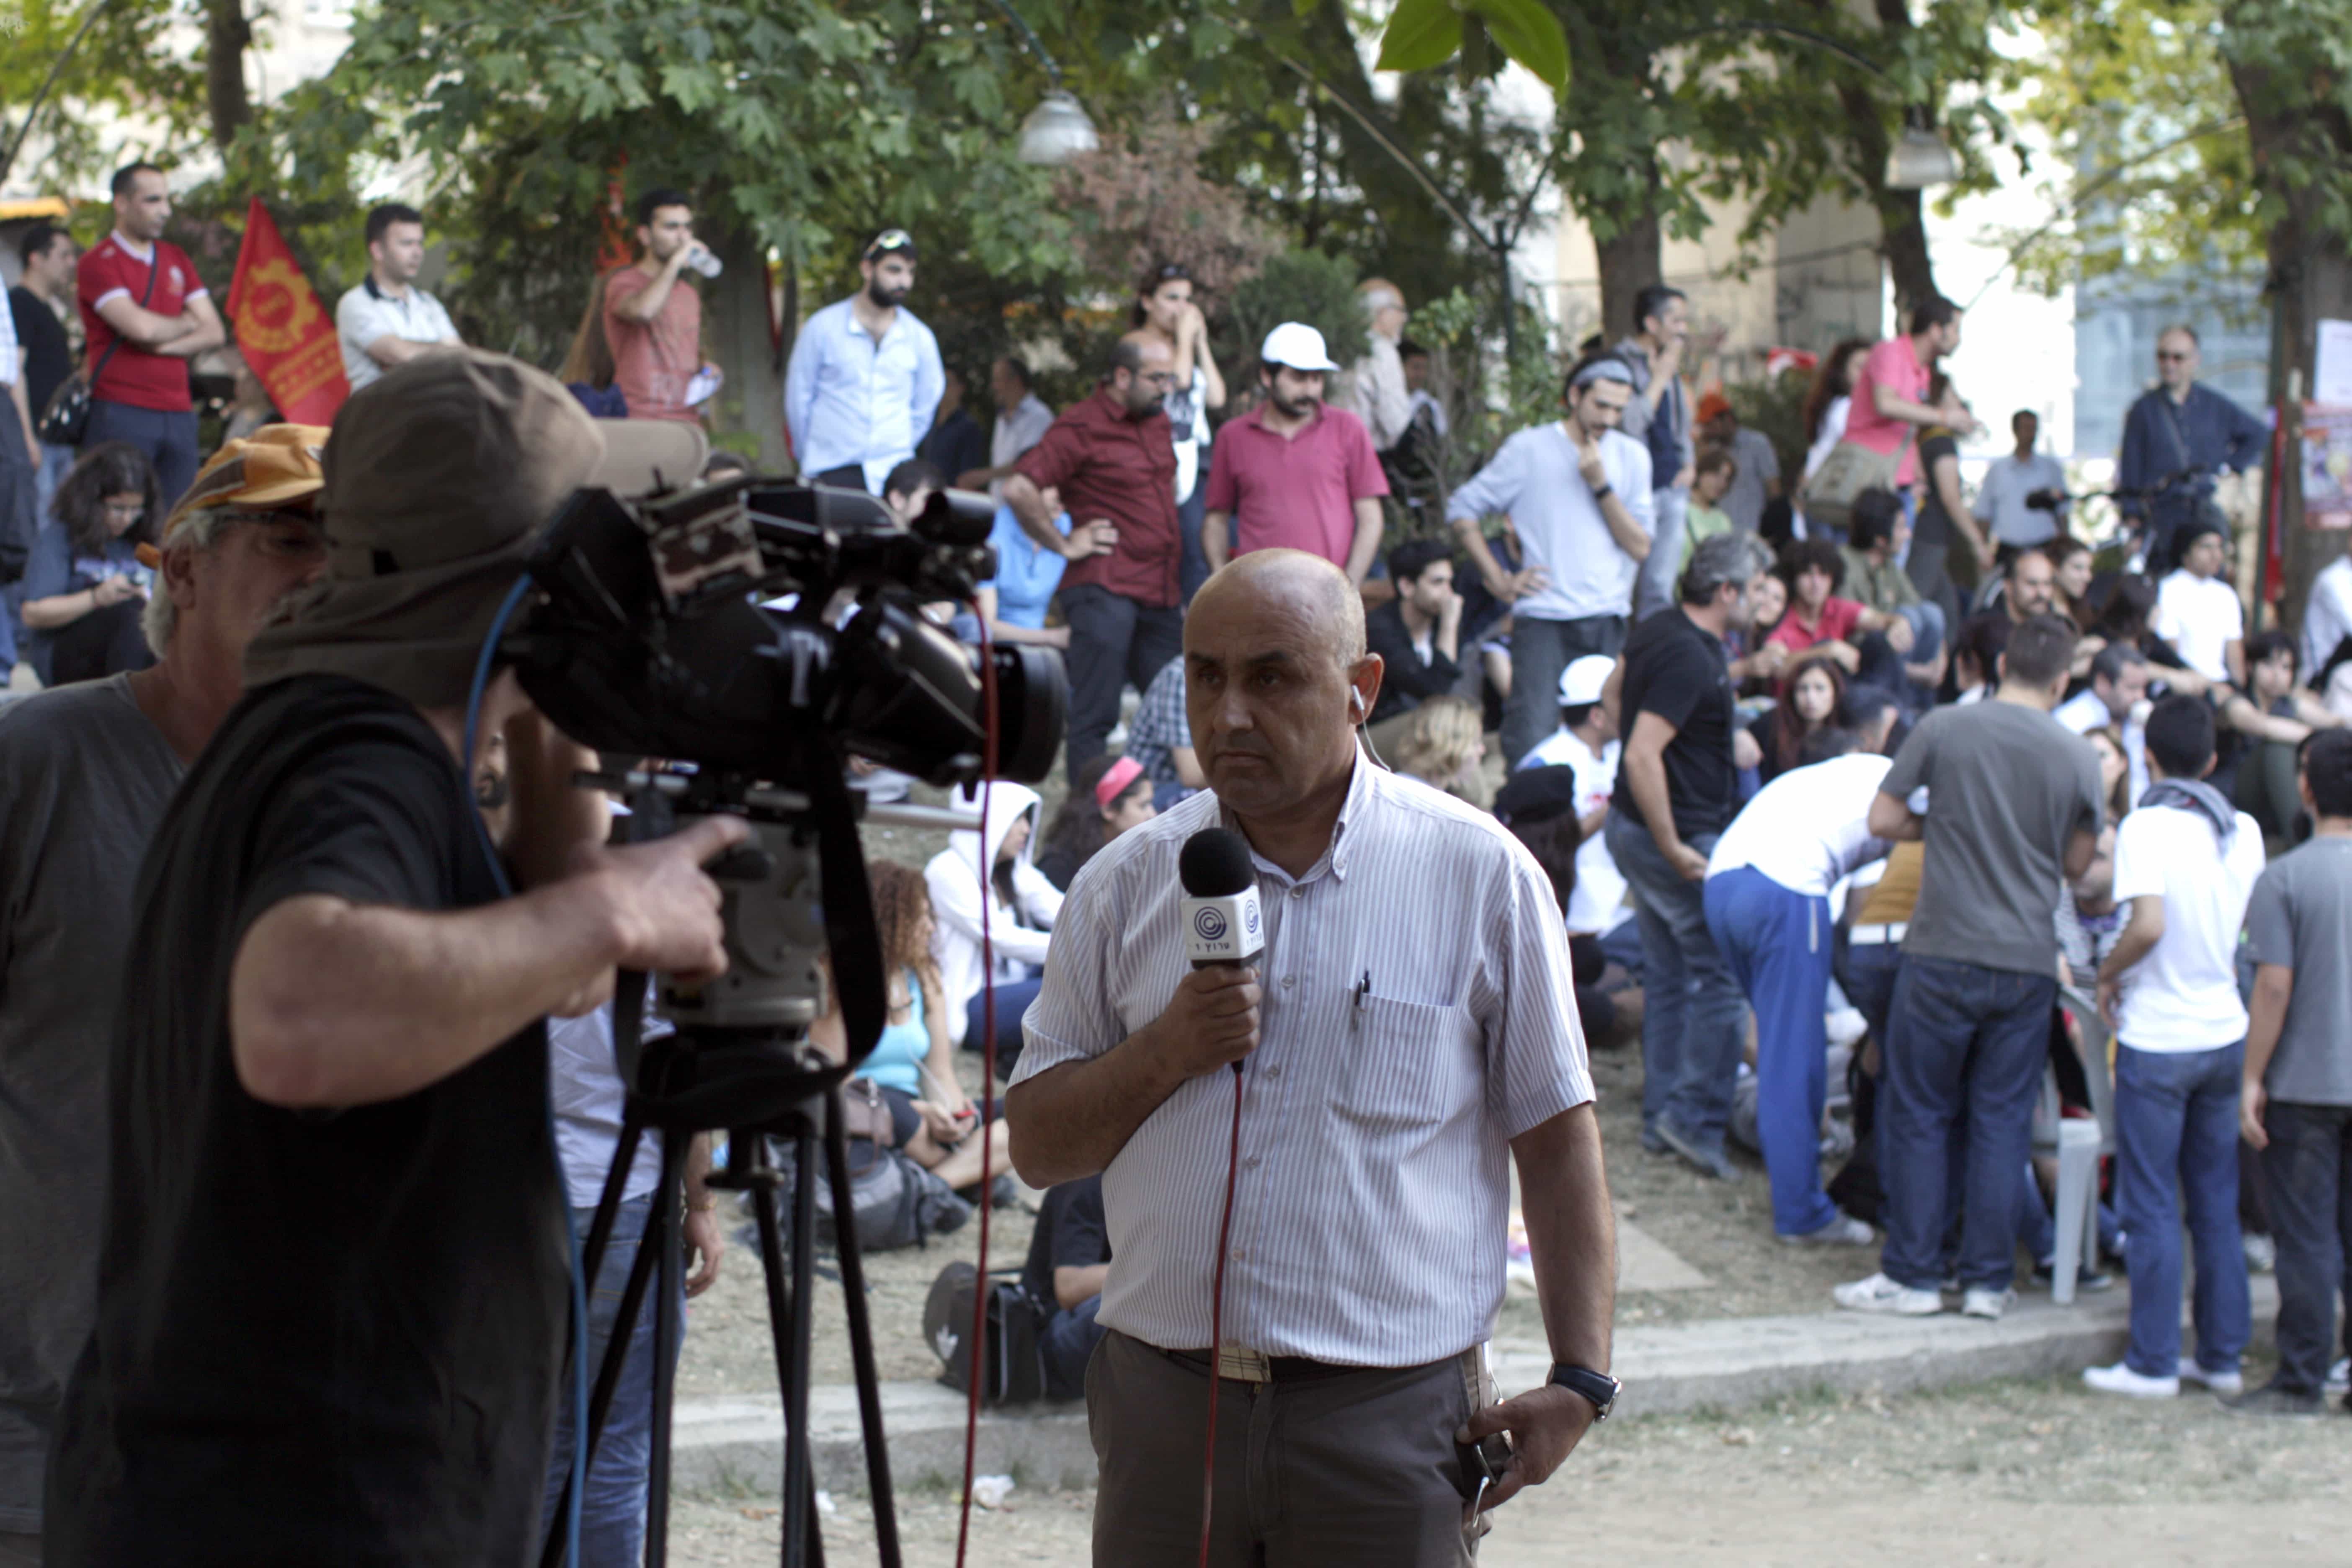 A TV journalist reports at Gezi park in Istanbul, 4 June 2013., AP Photo/Kostas Tsironis